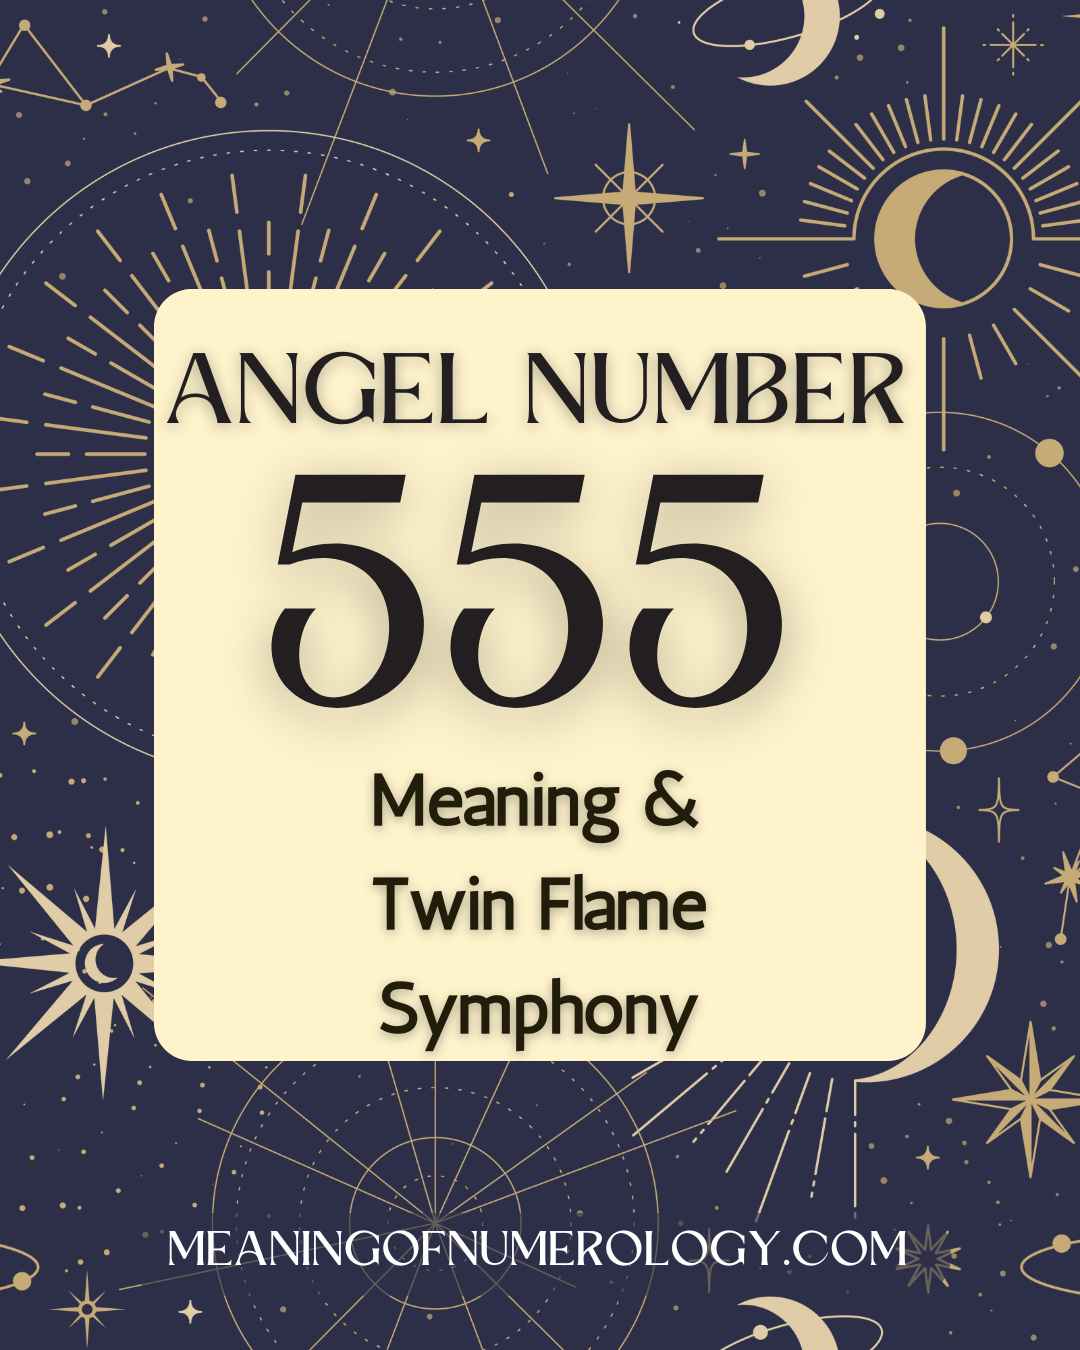 Purple Mystic Astrology Moon Angel Number 555 Meaning & Twin Flame Symphony